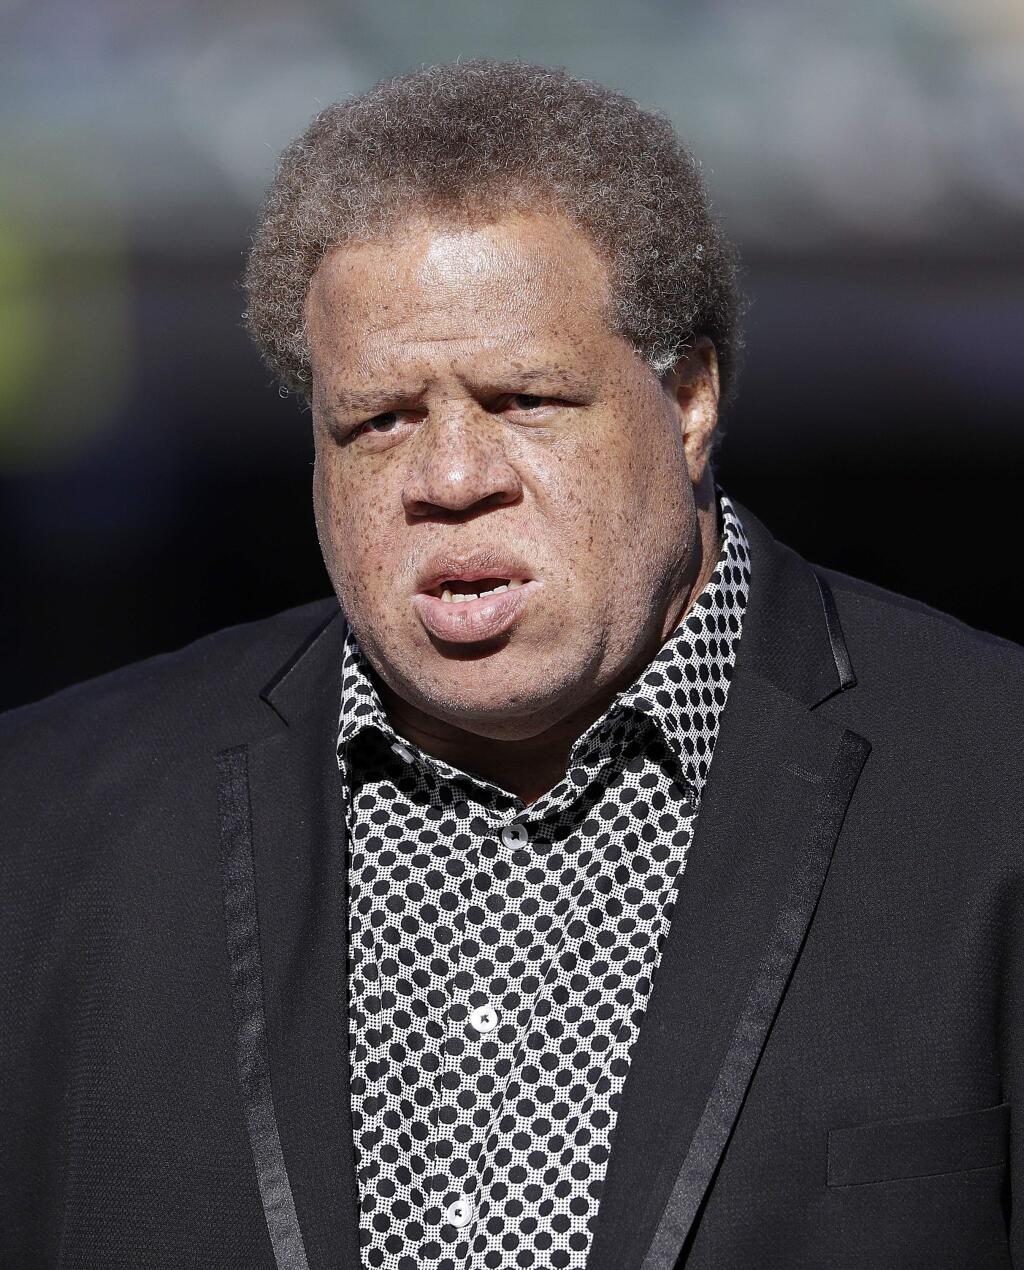 Oakland Raiders general manager Reggie McKenzie watches before a game between the Raiders and the Indianapolis Colts in Oakland, Saturday, Dec. 24, 2016. (AP Photo/Marcio Jose Sanchez)